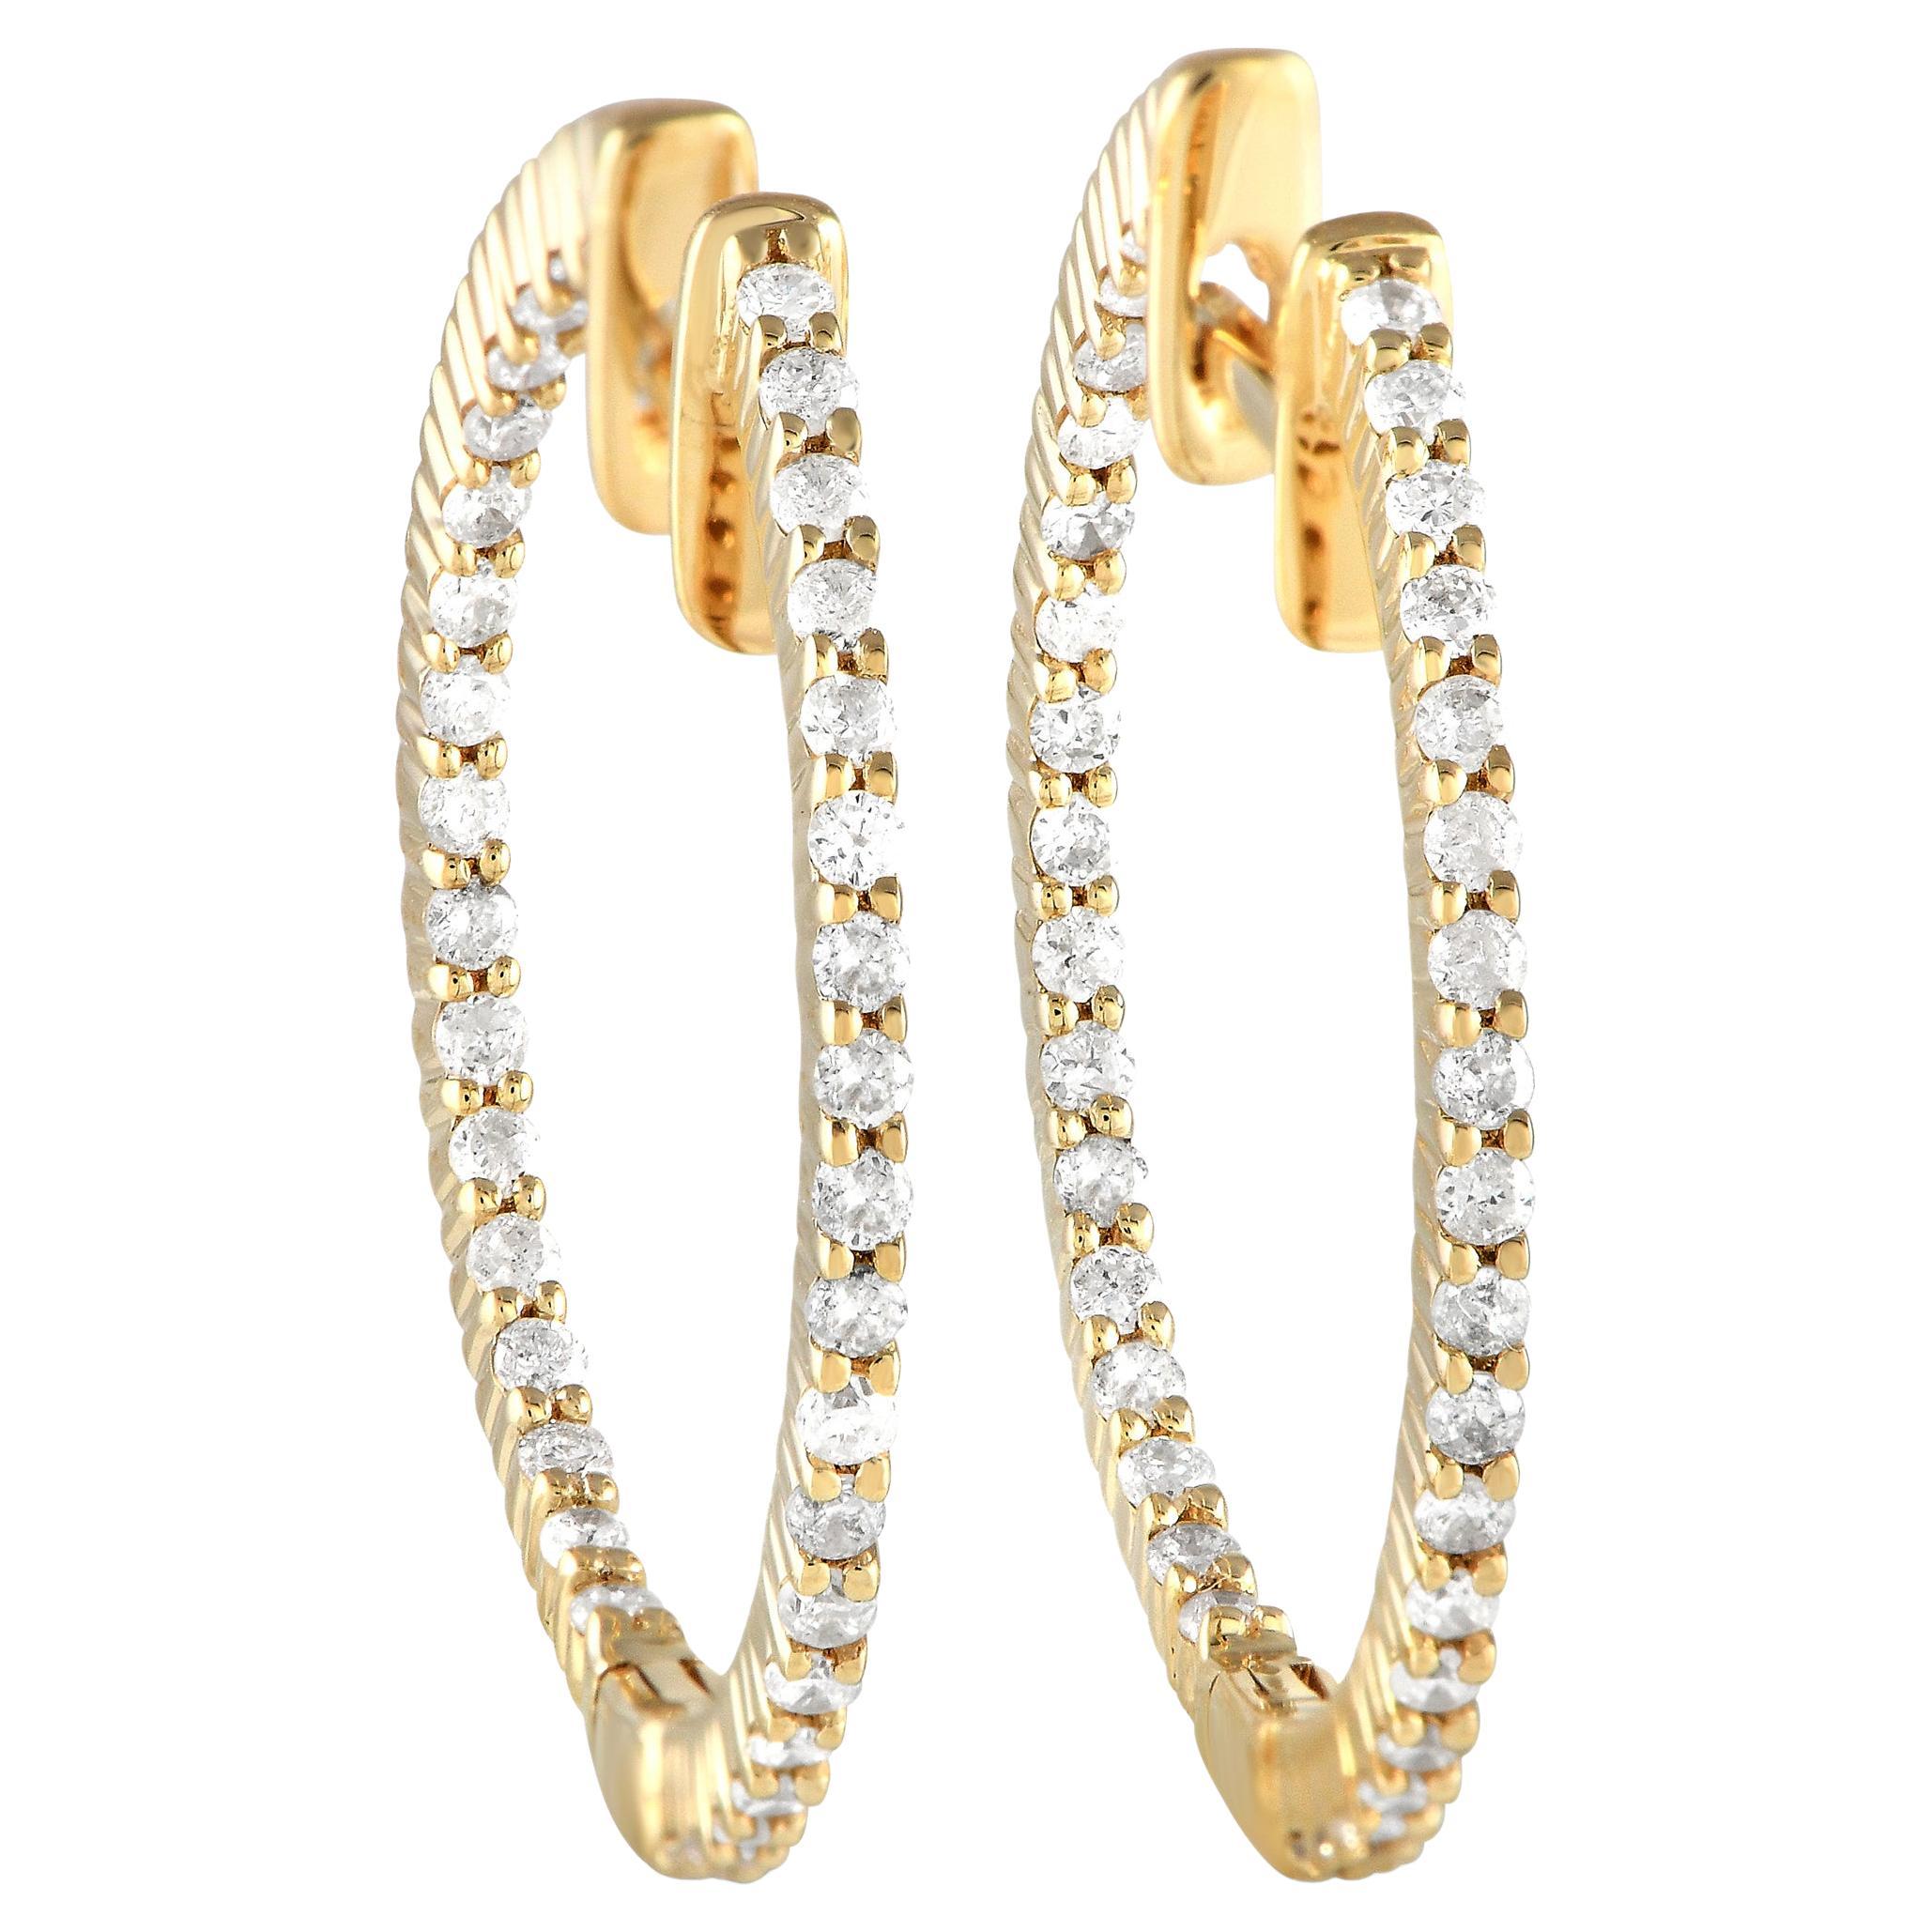 LB Exclusive 14K Gelbgold 0,55ct Diamant Inside-Out Hoop Ohrringe